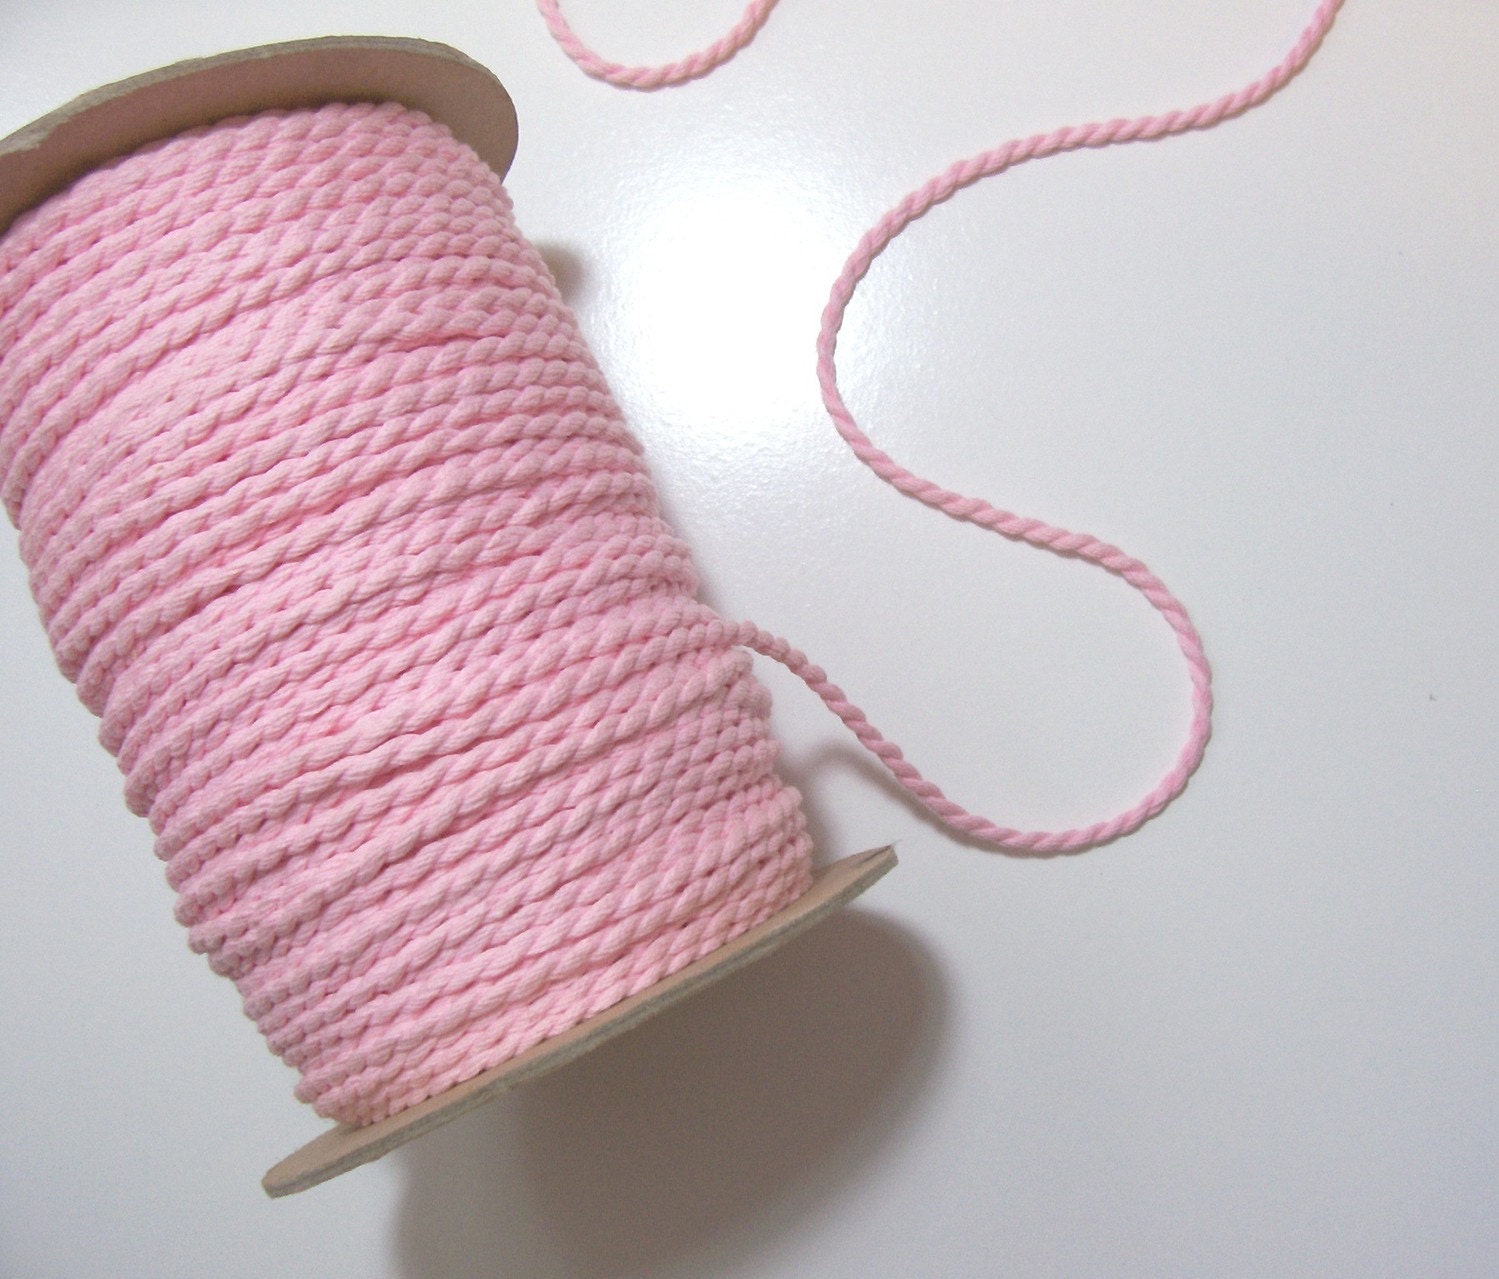 Cording:  Baby Pink Rope Cording Sewing Trim 1/4 inch wide x 1 yard